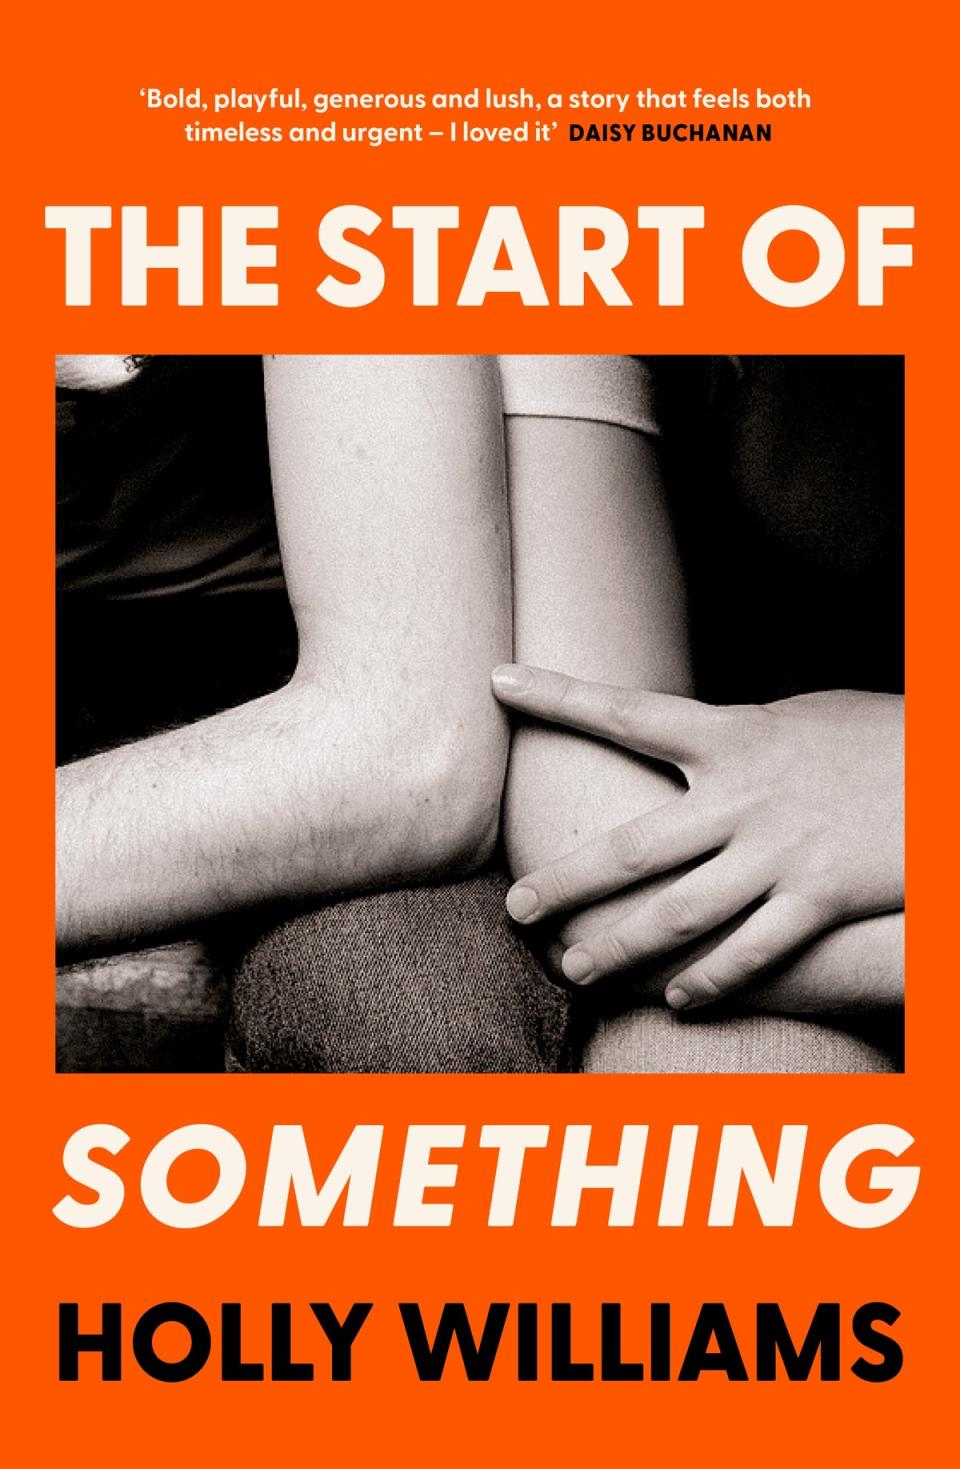 Holly Williams’s new book ‘The Start of Something’ (Orion)